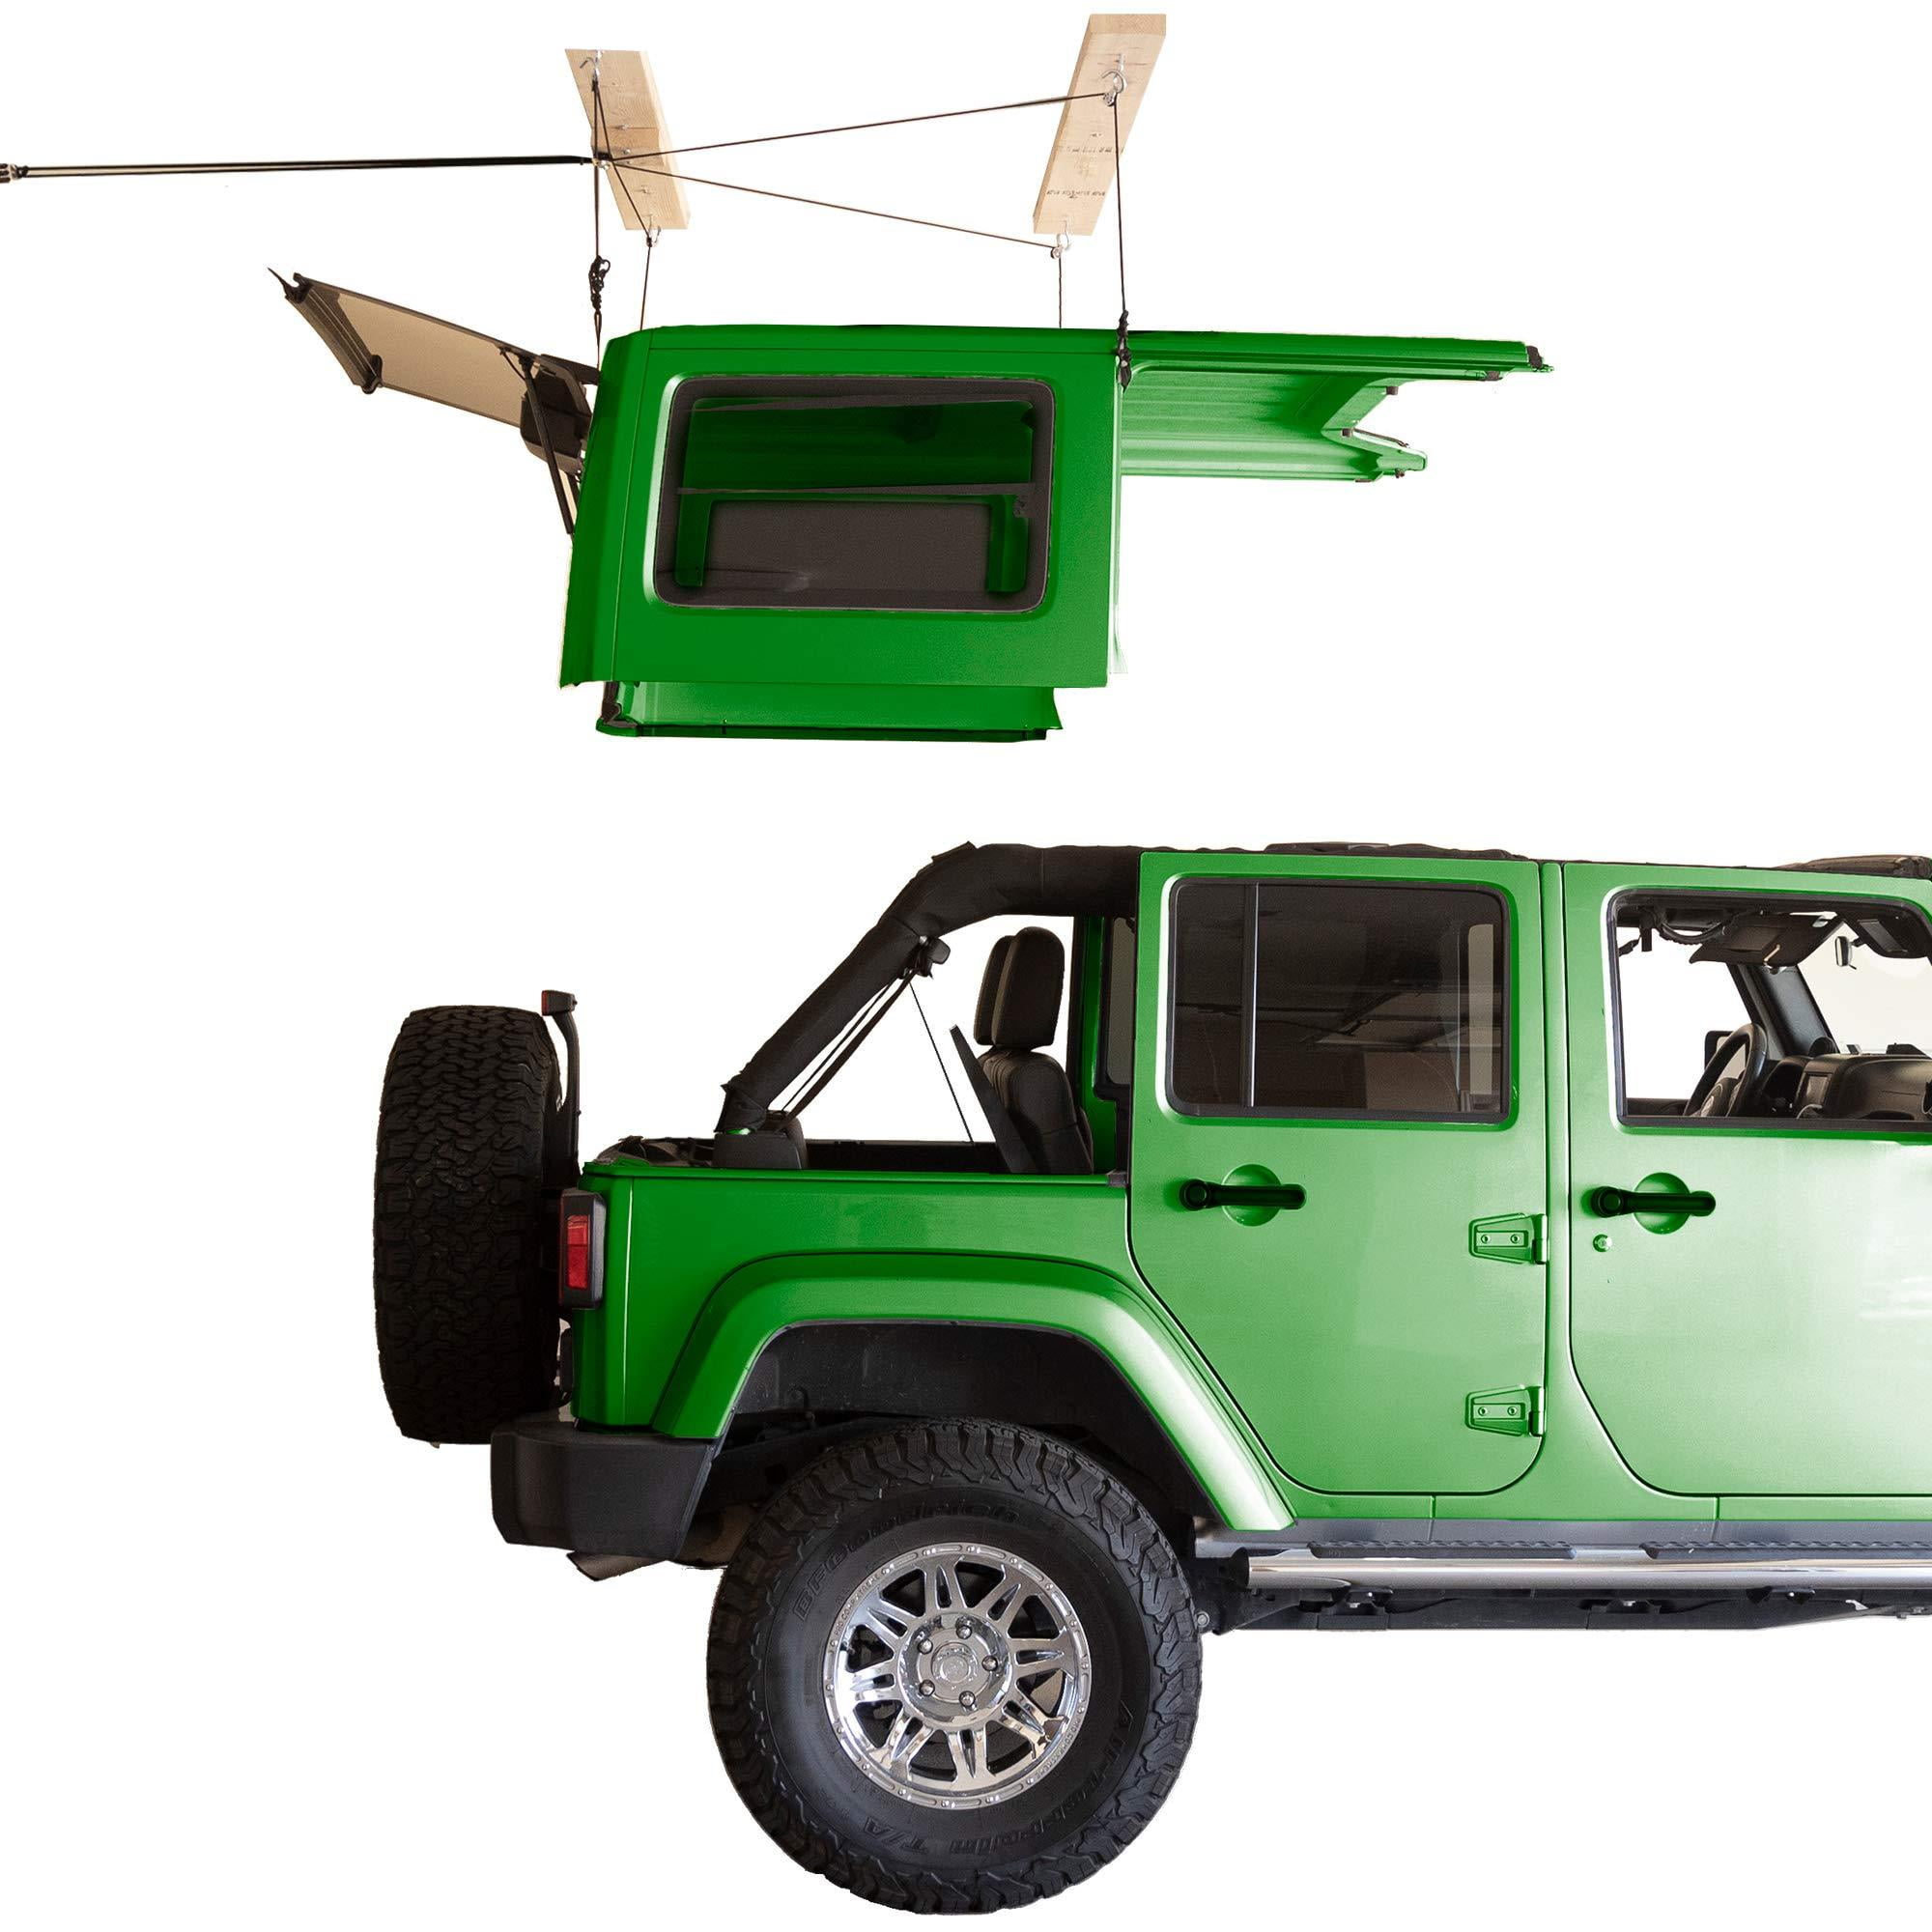 HARKEN - Hardtop Overhead Garage Storage Hoist for Jeep Wrangler and Ford  Bronco, Self-Leveling, Safe Anti-Drop System, Easy One-Person Operation,  (Bonus T Knobs for Quick Hard Top Removal 